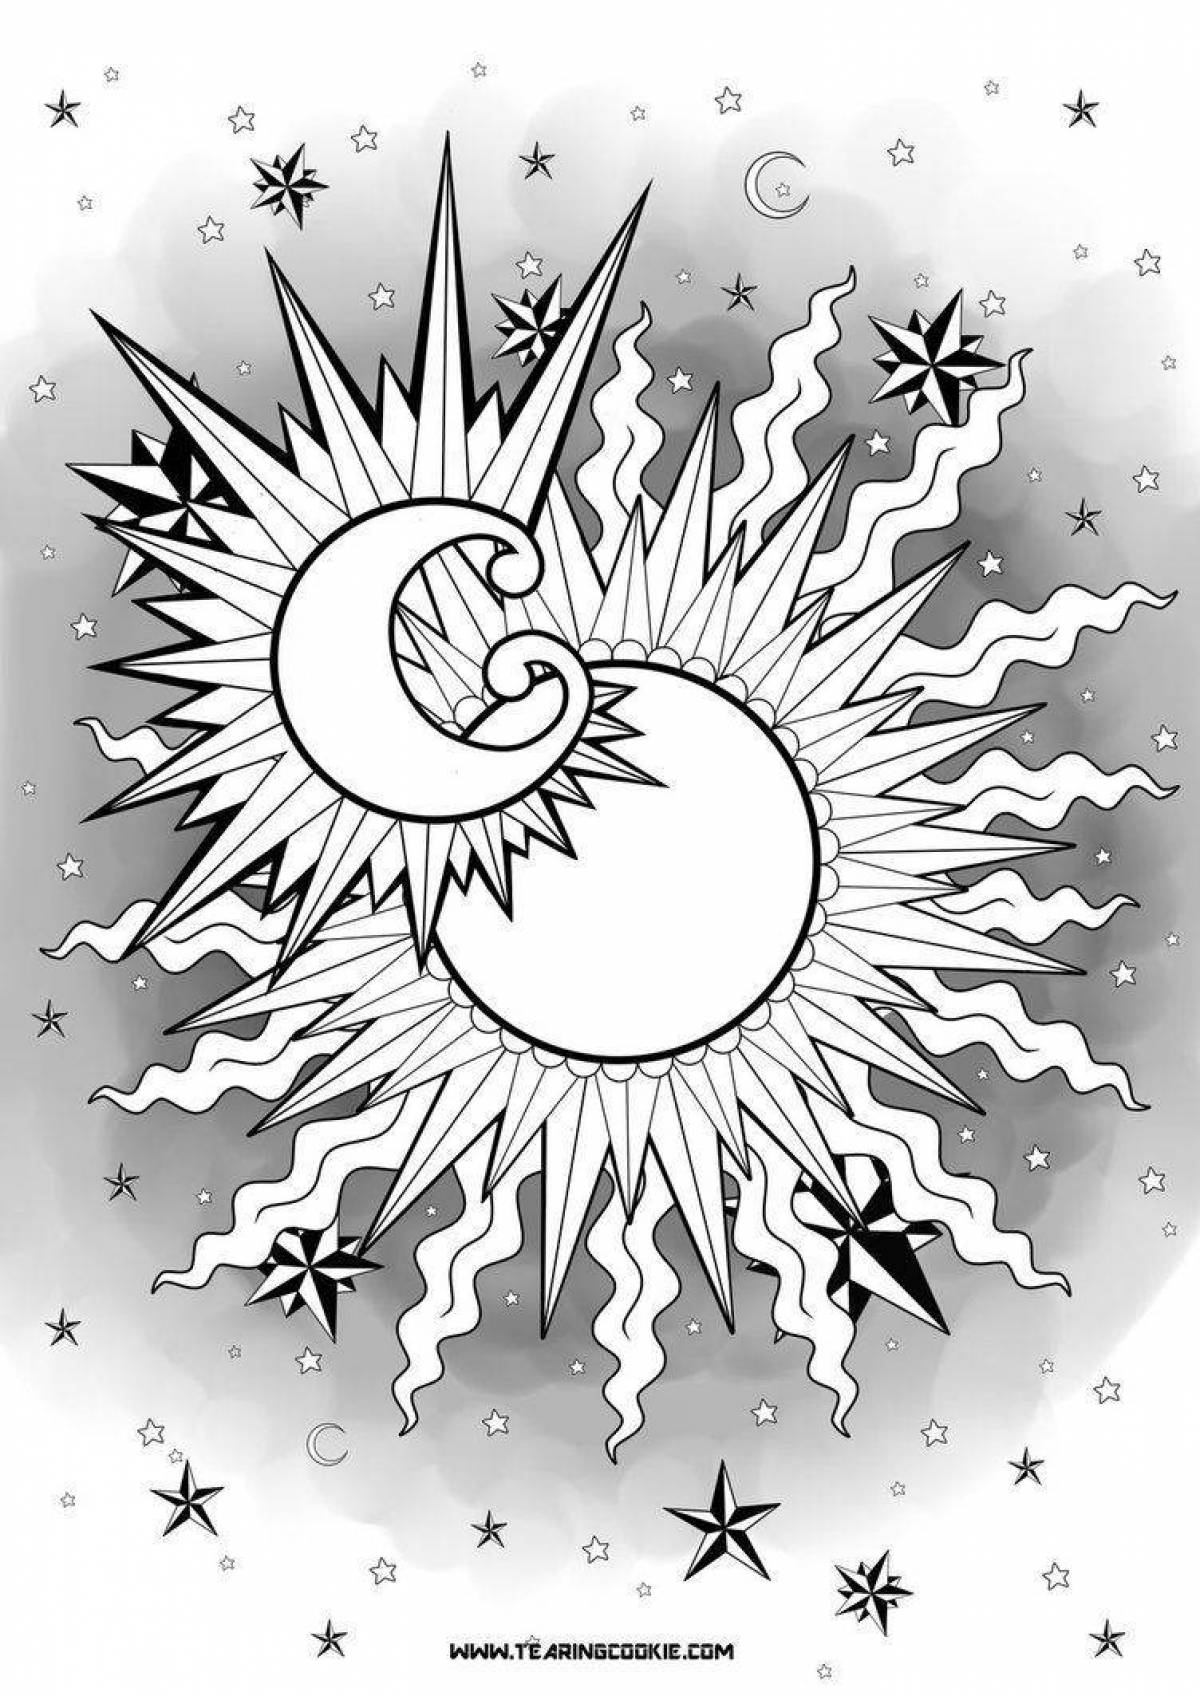 Coloring book dazzling sun and moon